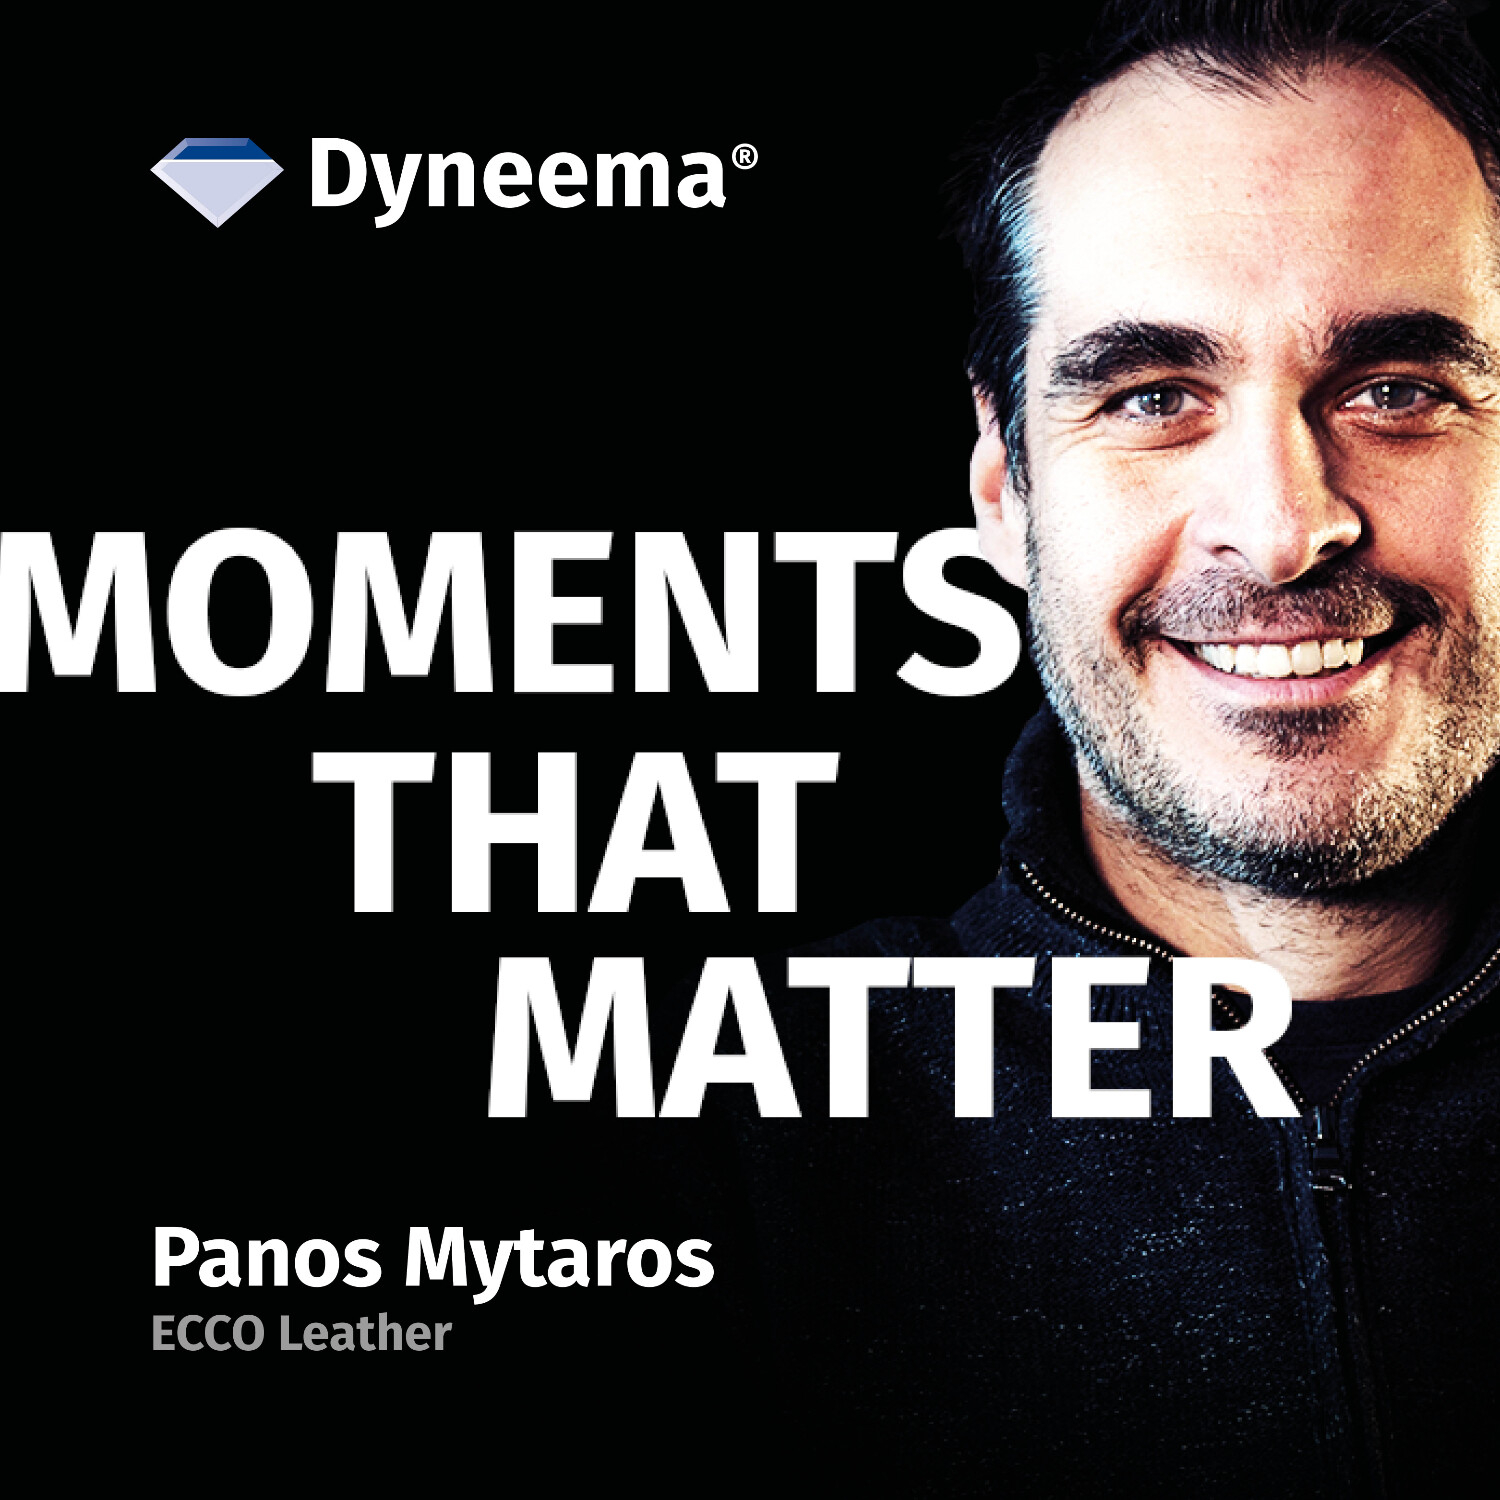 mouse Postcard Consulate Panos Mytaros – ECCO Leather – Moments That Matter, with Dyneema® | Moments  That Matter, with Dyneema on Acast